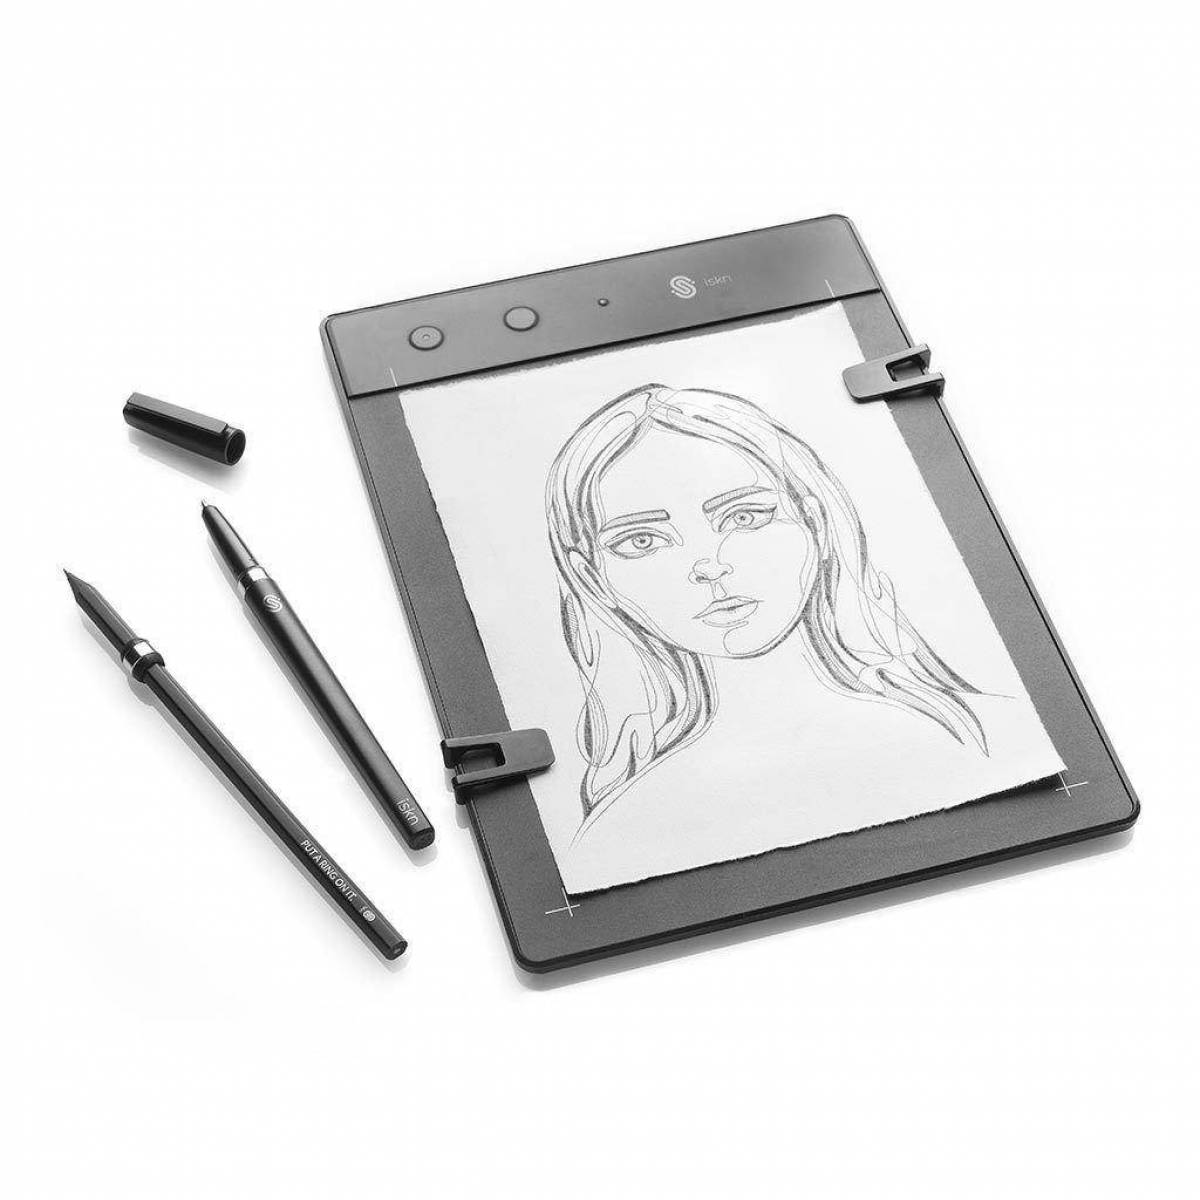 A fun drawing tablet coloring book for beginners